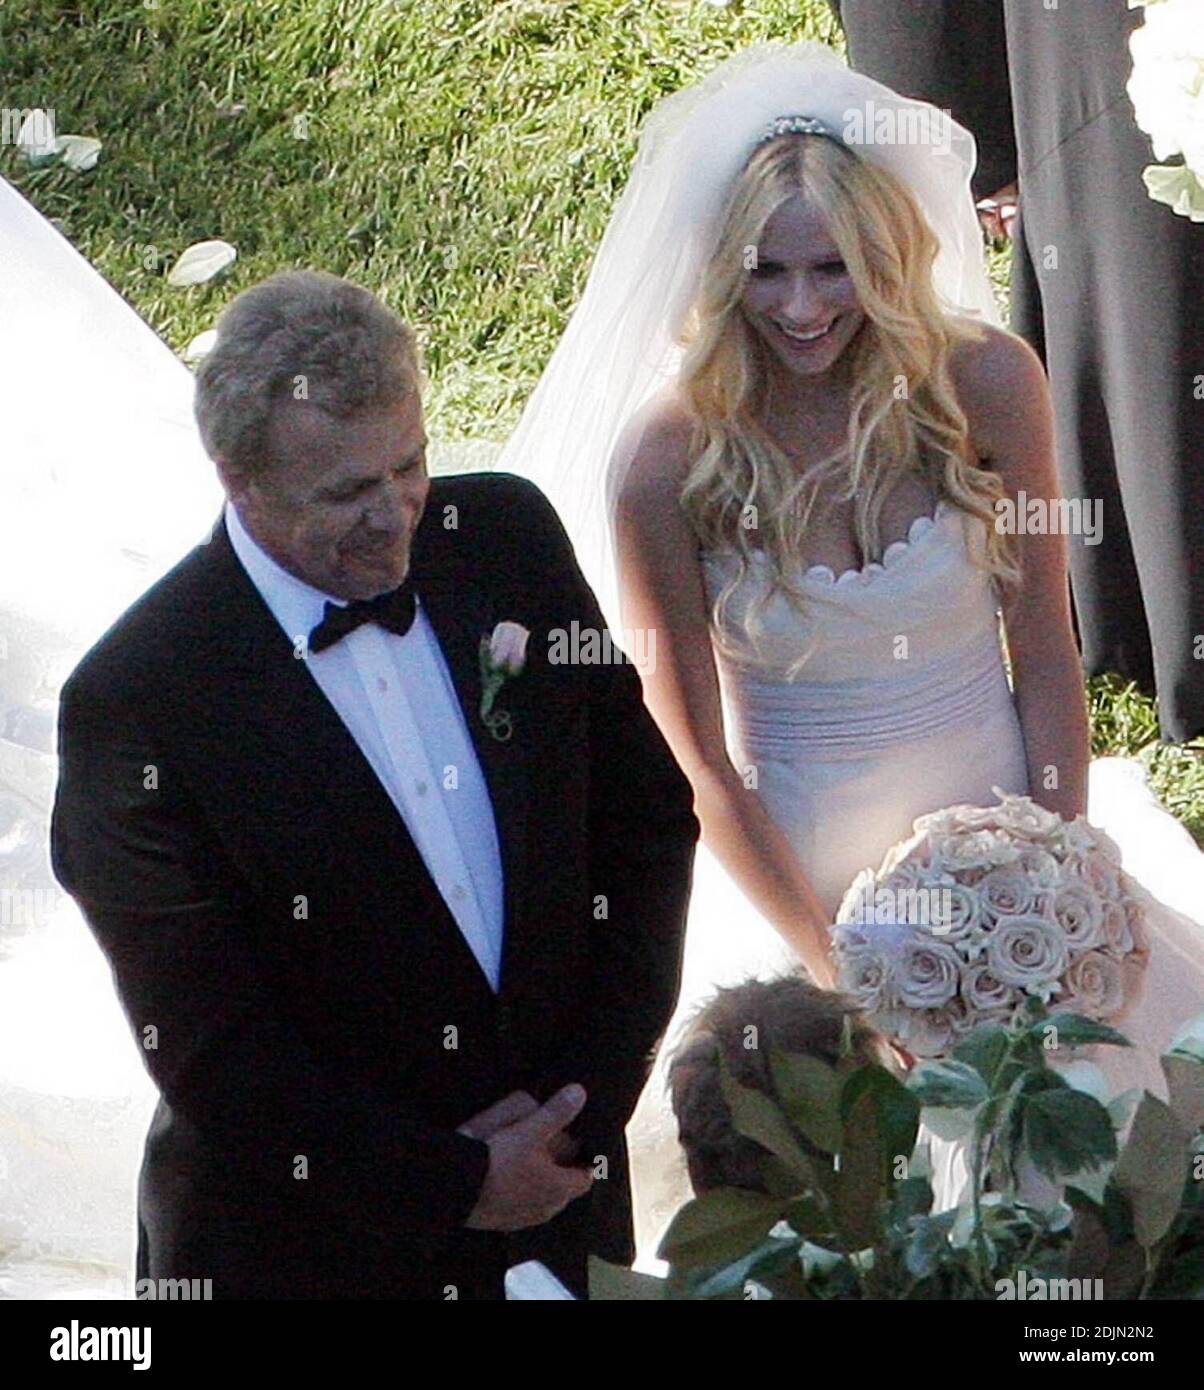 avril lavigne married her sweetheart deryck whibley in an romantic outdoor non denominational ceremony on saturday at 5pm at a private estate in montecito ca the bride wearing a vera wang gown a veil and holding a bouquet of white roses walked over rose petals with her father john at her arm while a string orchestra played mendelssohns wedding march the canadian rocker was surrounded by 110 close friends and family including guests from her hometown in ontario a cocktail hour and sit down meal followed the emotional exchange of vows the newlyweds first dance was to the goo goo d 2DJN2N2